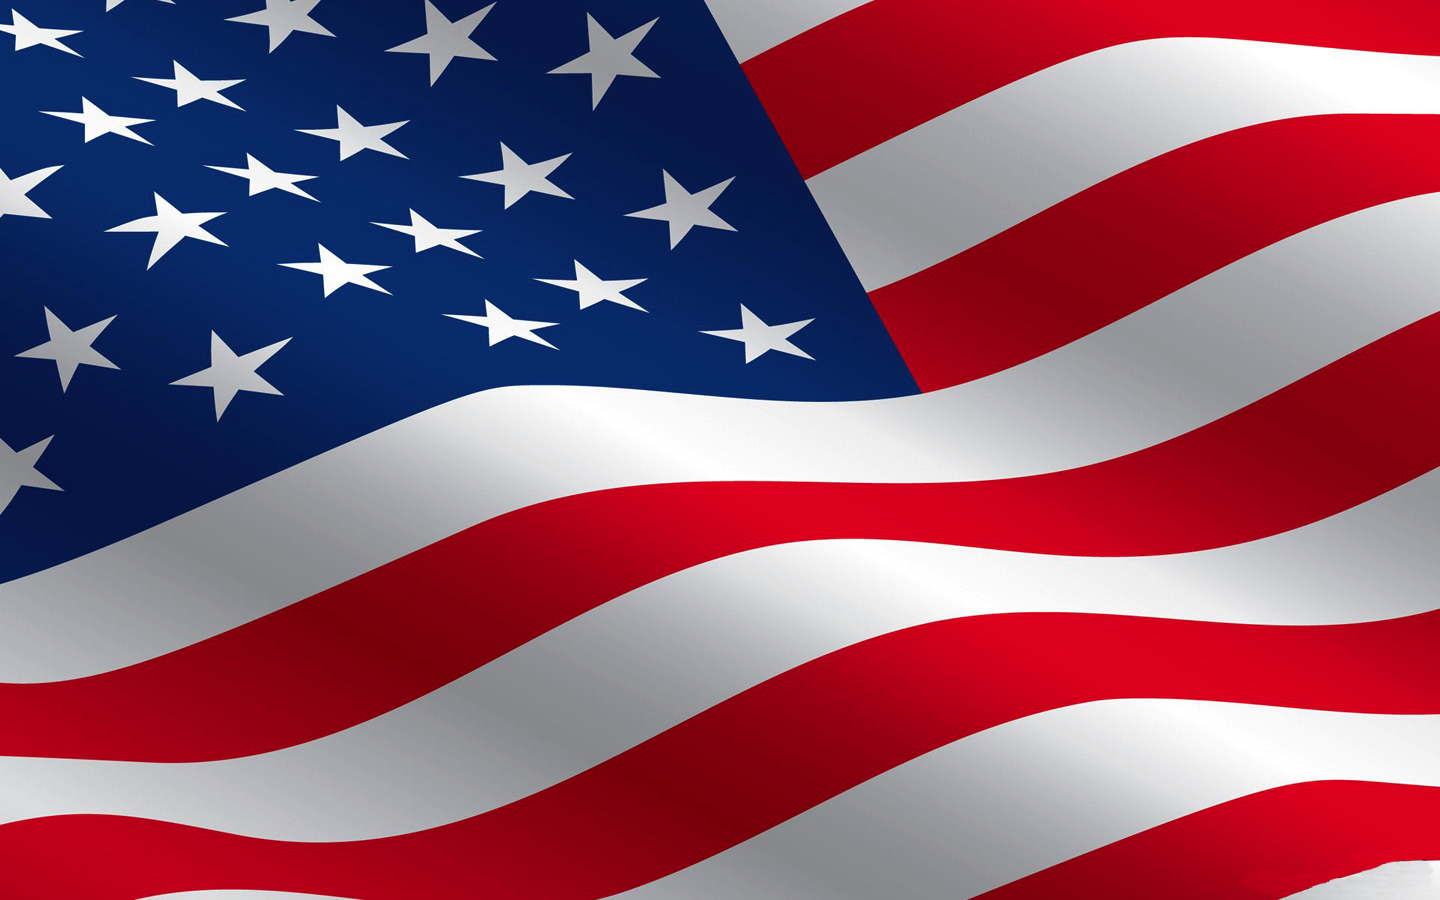 USA Flag Image for 4th of July 2022